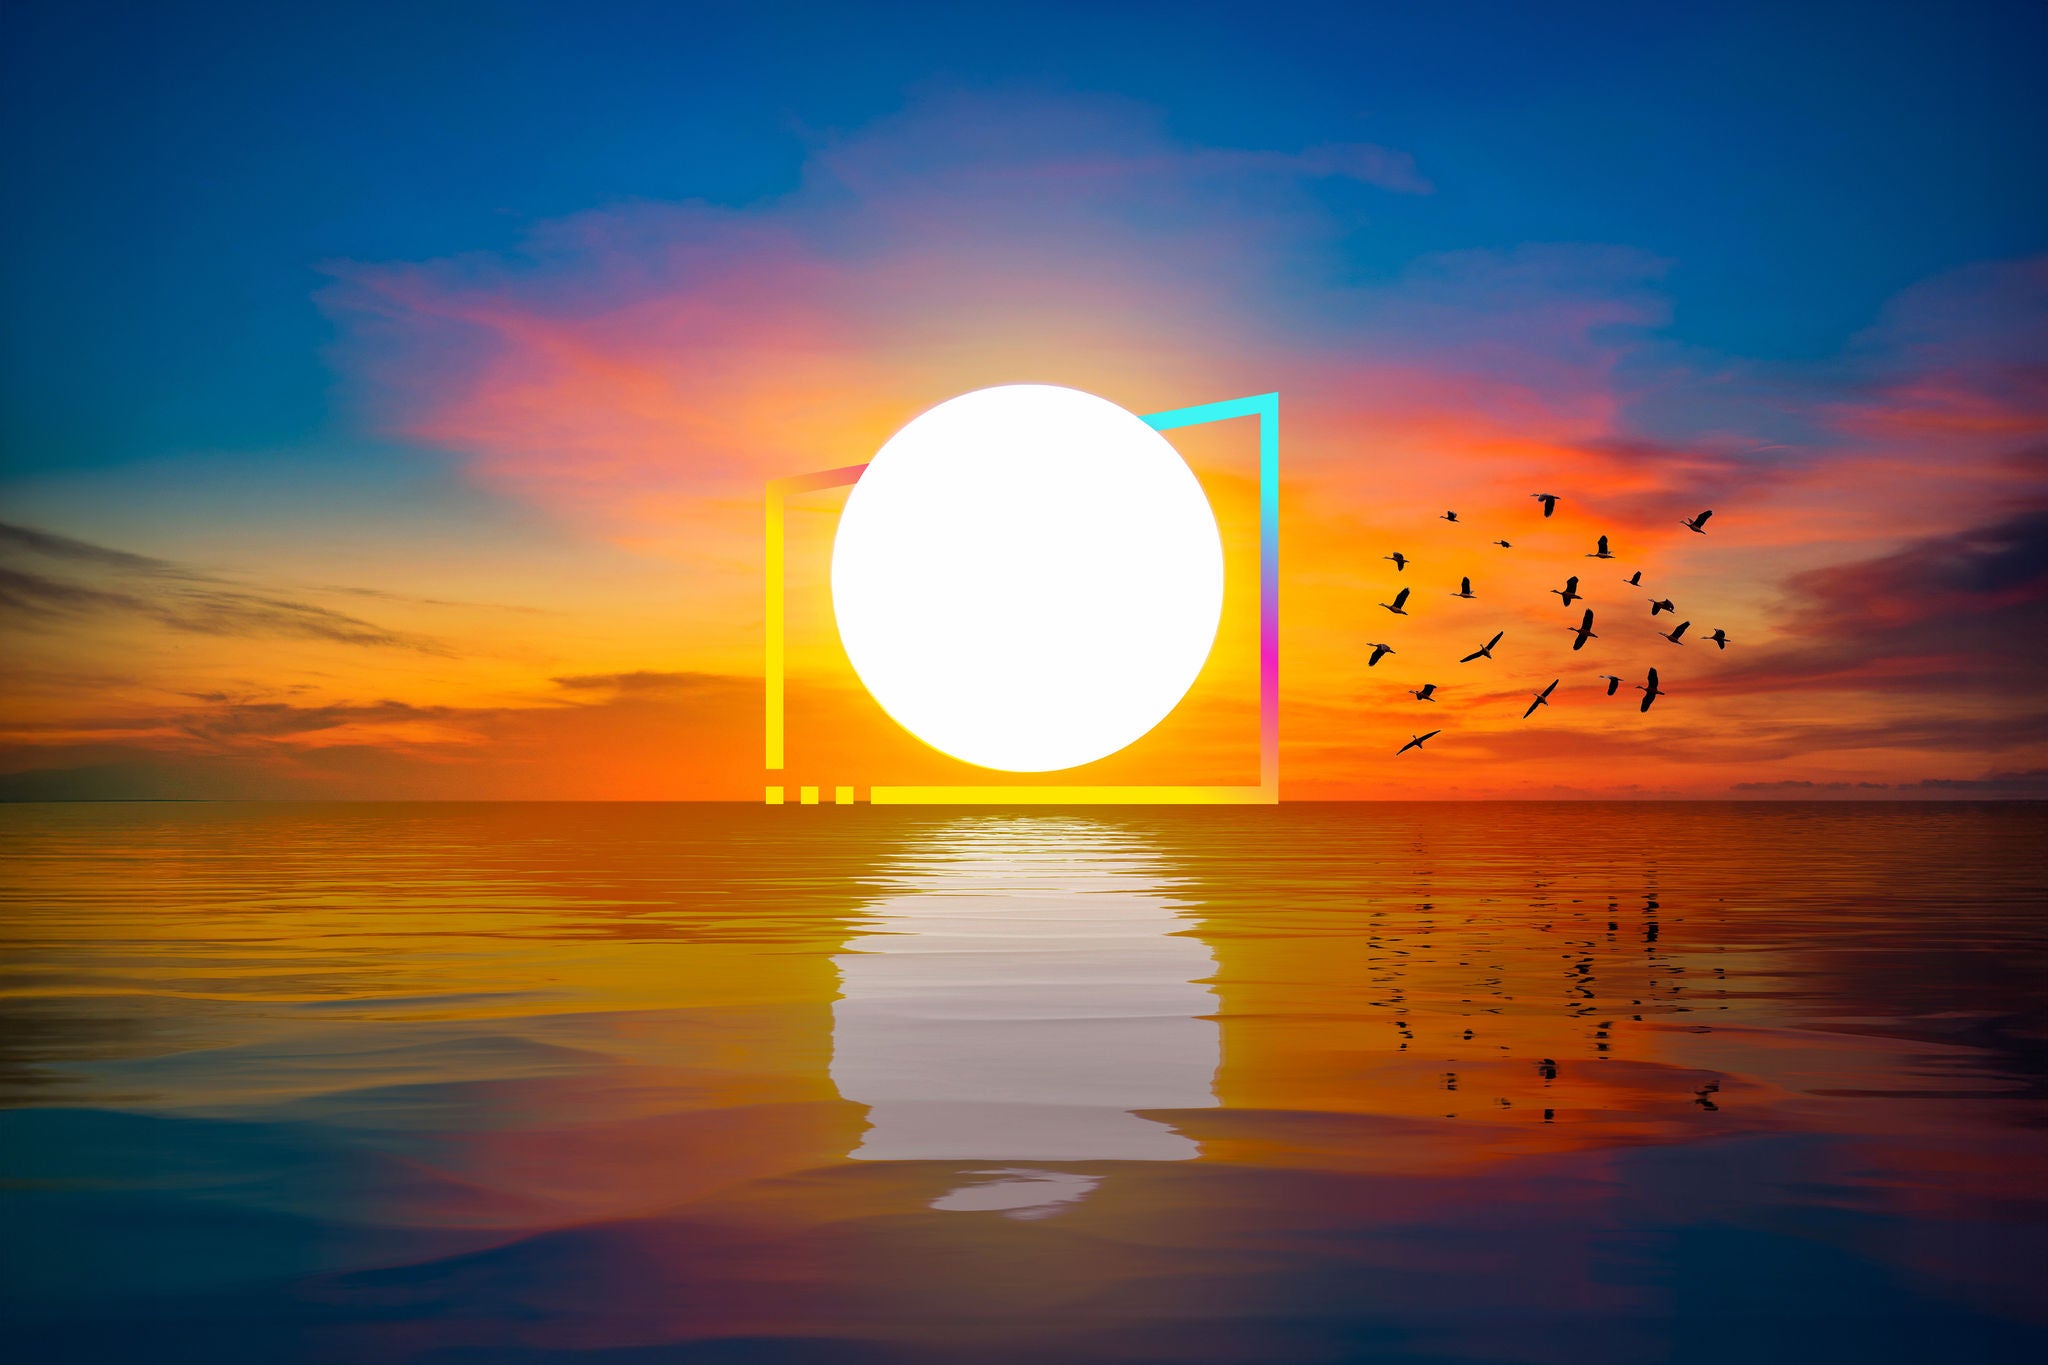 The big sun at dawn on the sea with beautiful reflections and flocks of birds in flight